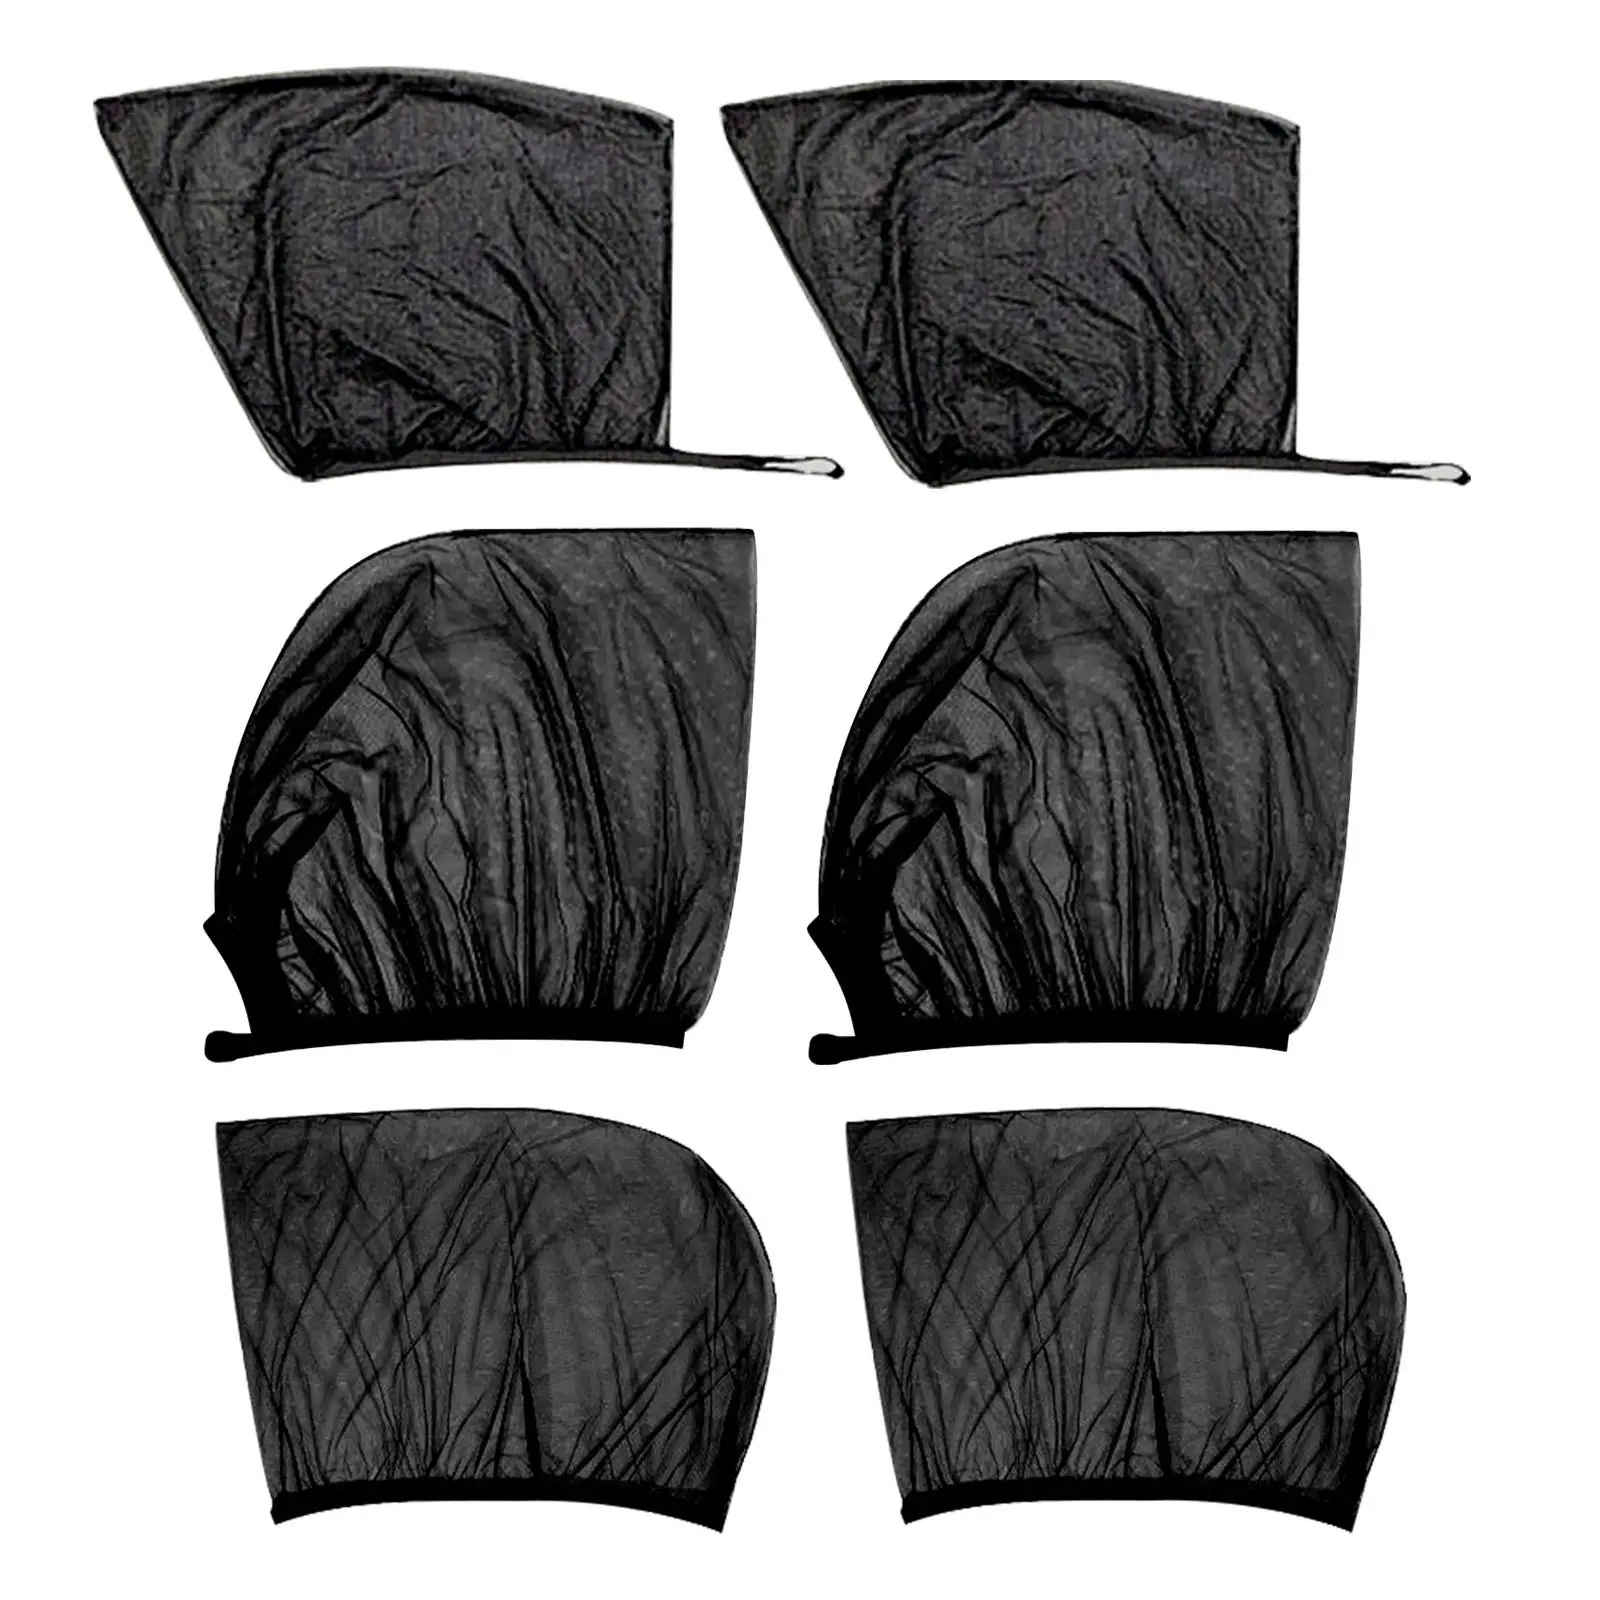 Sunlight Car Window Shades Privacy Protector Sun Protection Stretchy Sun Shade Visor Blackout Covers for Toddler Kids Baby Adult